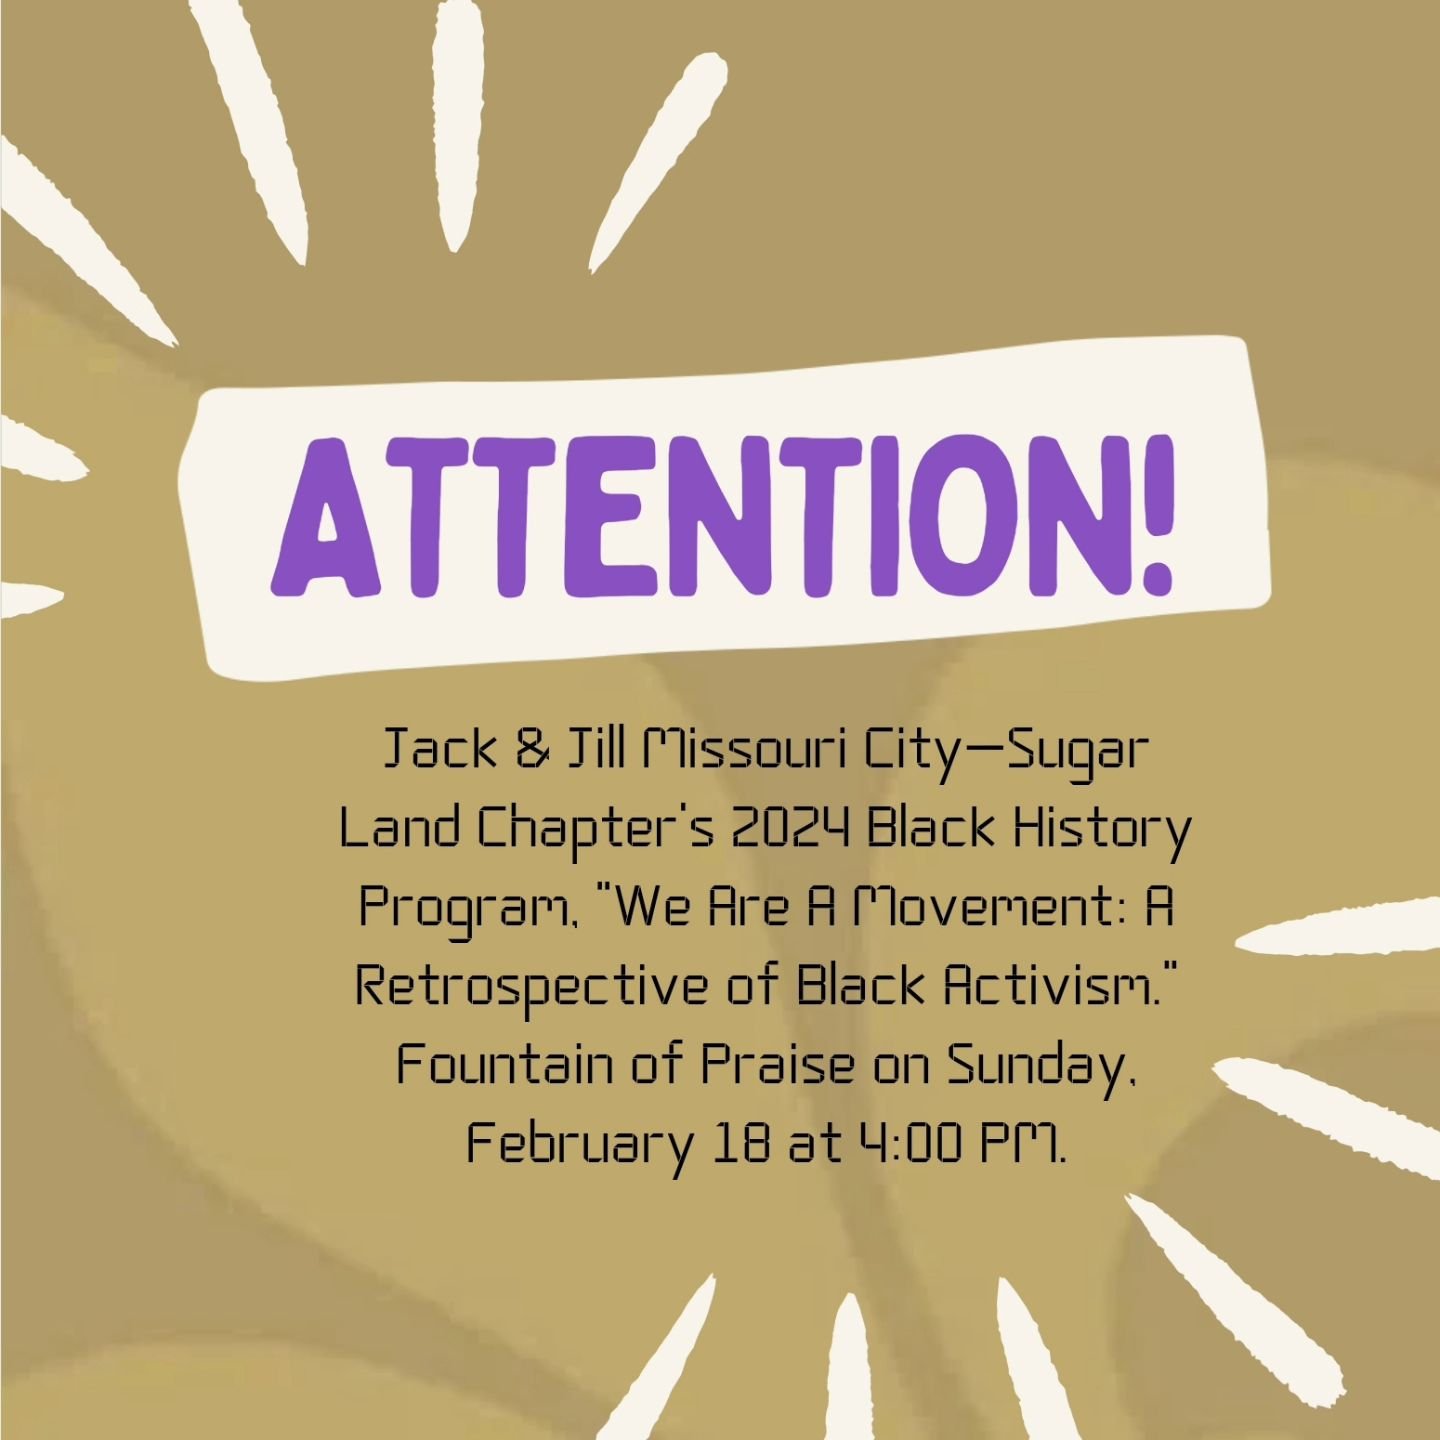 I will a vendor at the Jack &amp; Jill Missouri City-Sugar Land Chapter&rsquo;s&nbsp;2024 Black History Program,&nbsp;&ldquo;We Are A Movement: A Retrospective of Black Activism&rdquo;&nbsp;.

The event will be held at the Fountain of Praise on&nbsp;